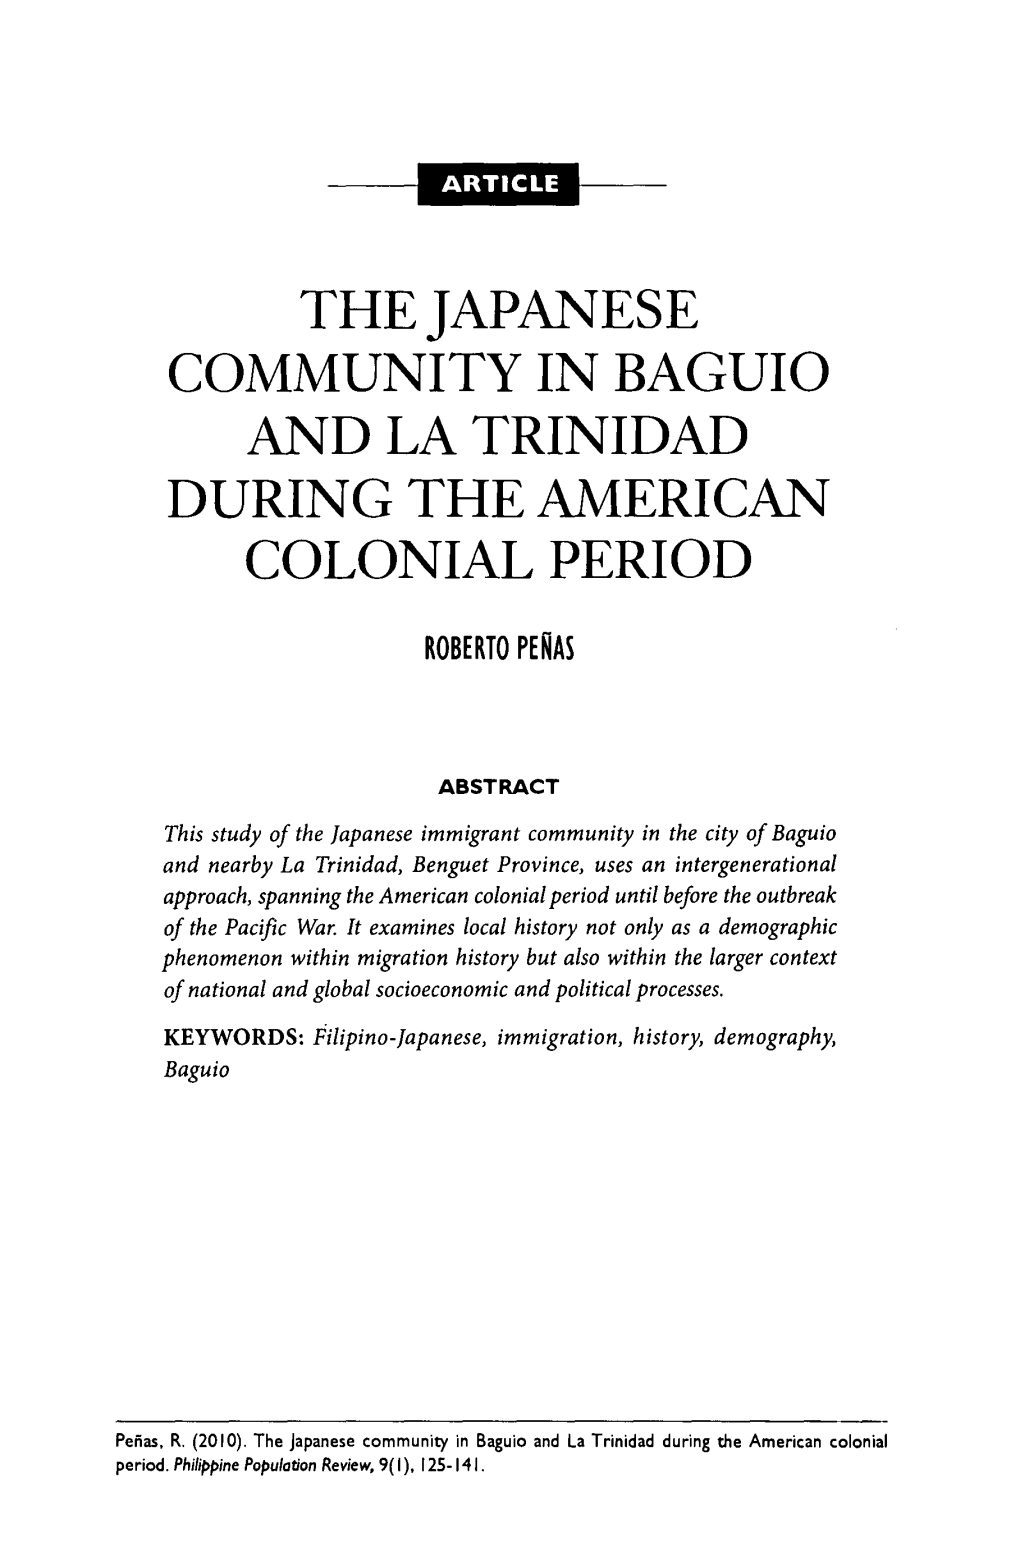 The Japanese Community in Baguio and La Trinidad During the American Colonial Period